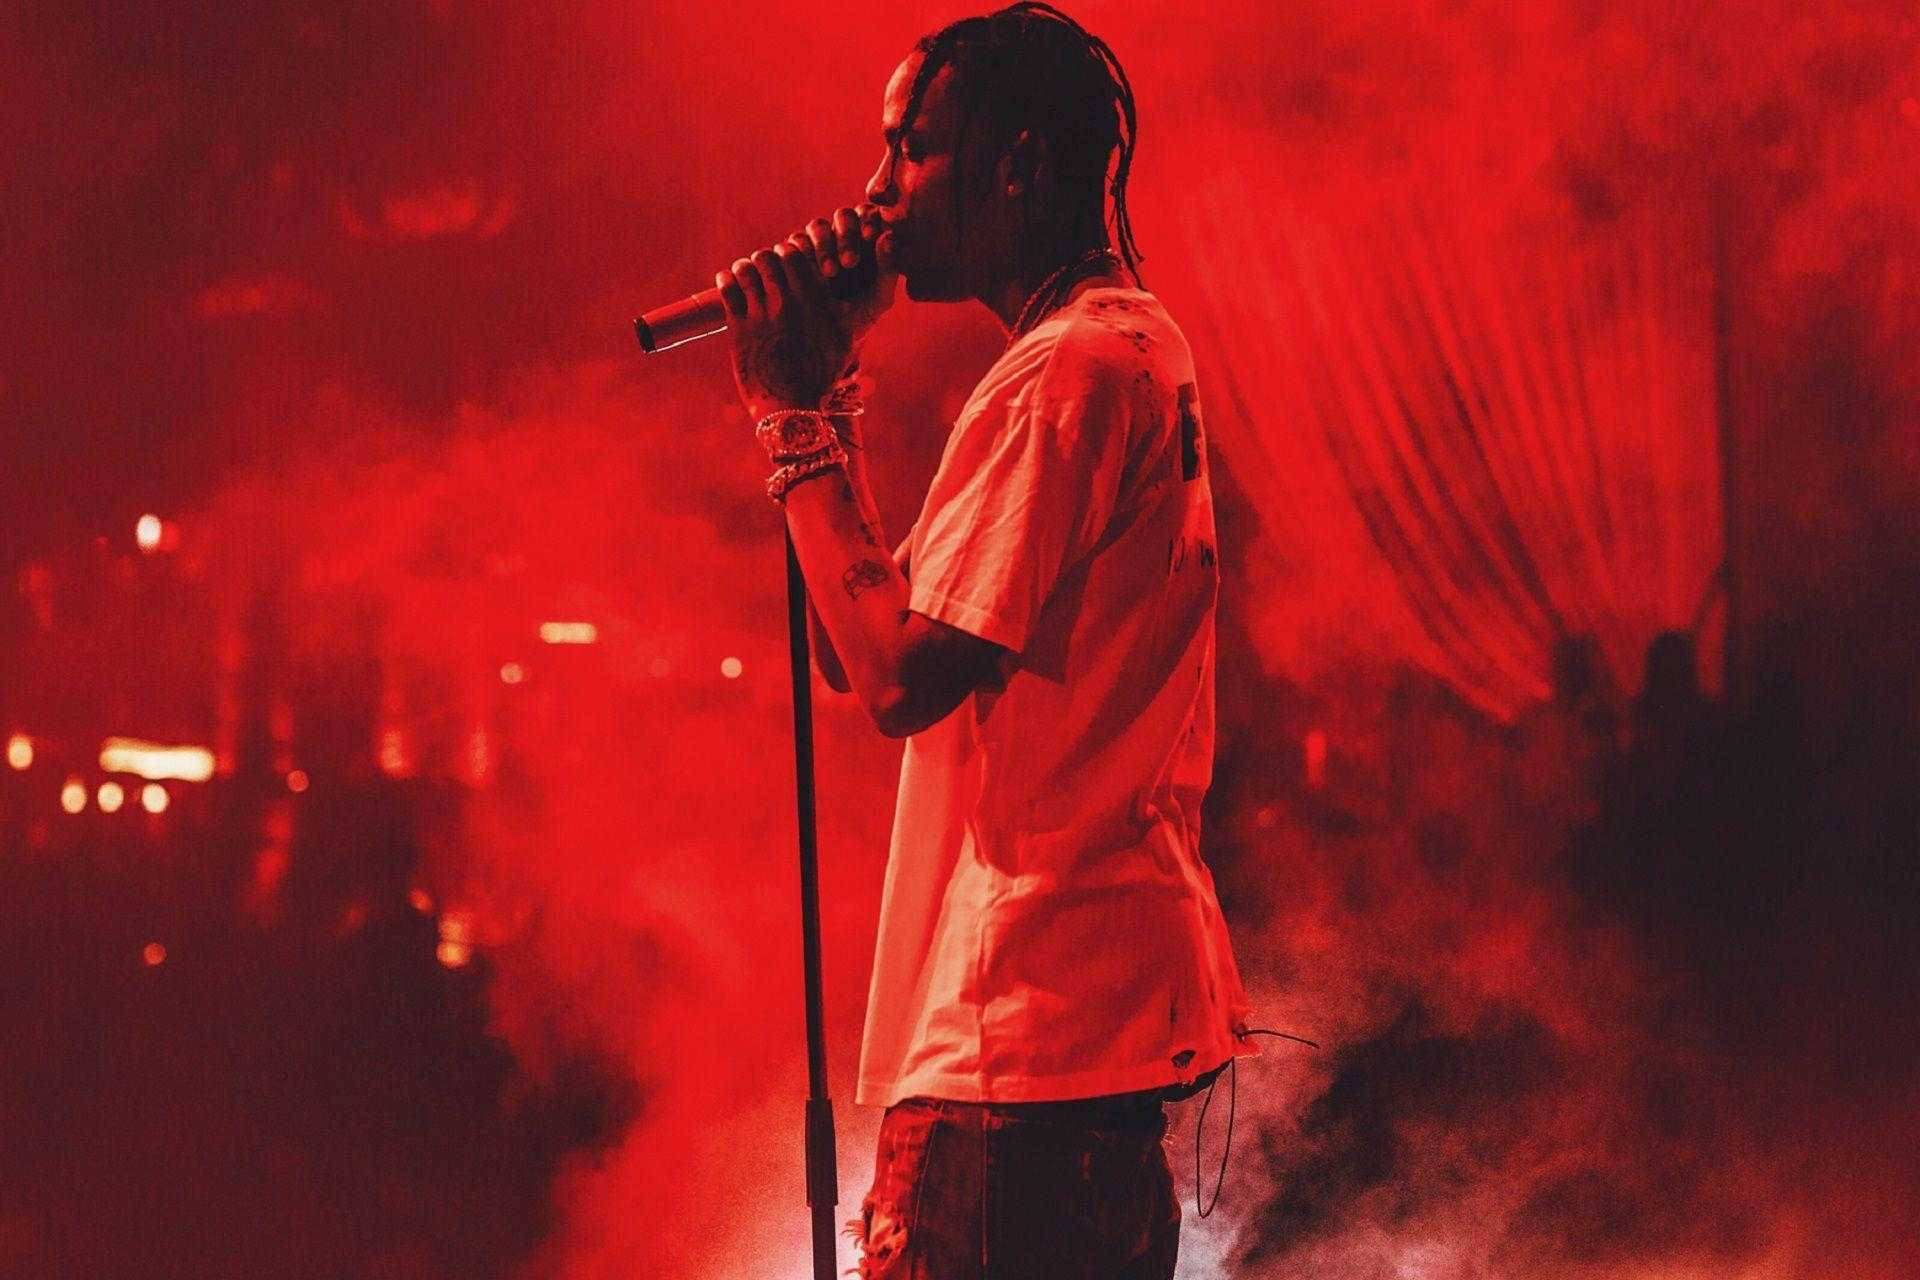 "The iconic look of Travis Scott, a mashup of artistic excellence." Wallpaper